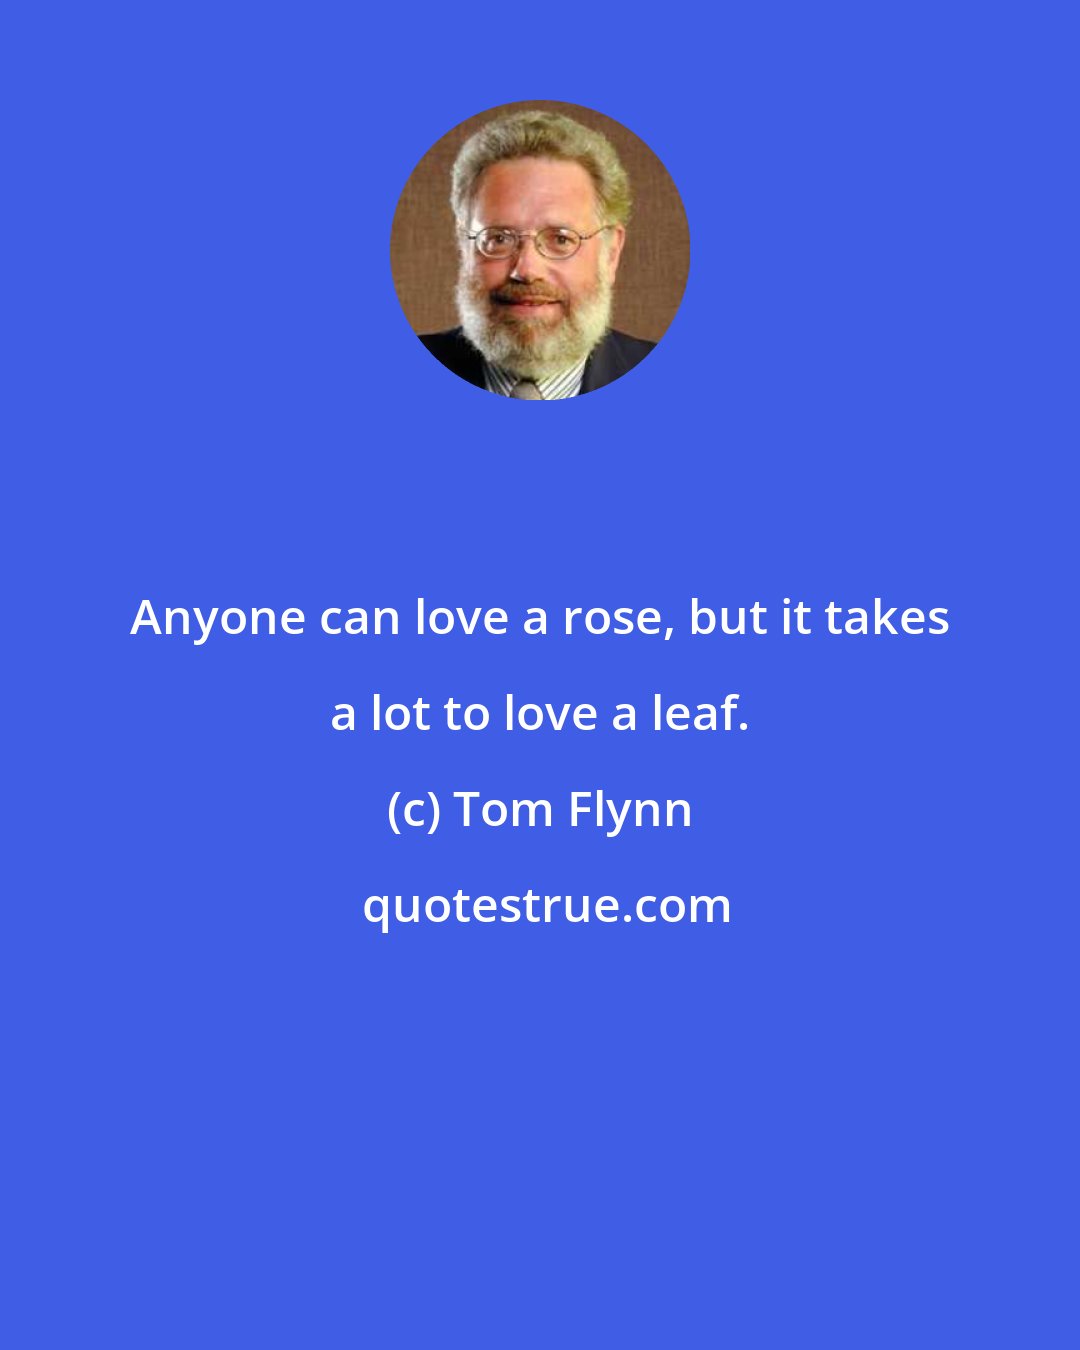 Tom Flynn: Anyone can love a rose, but it takes a lot to love a leaf.